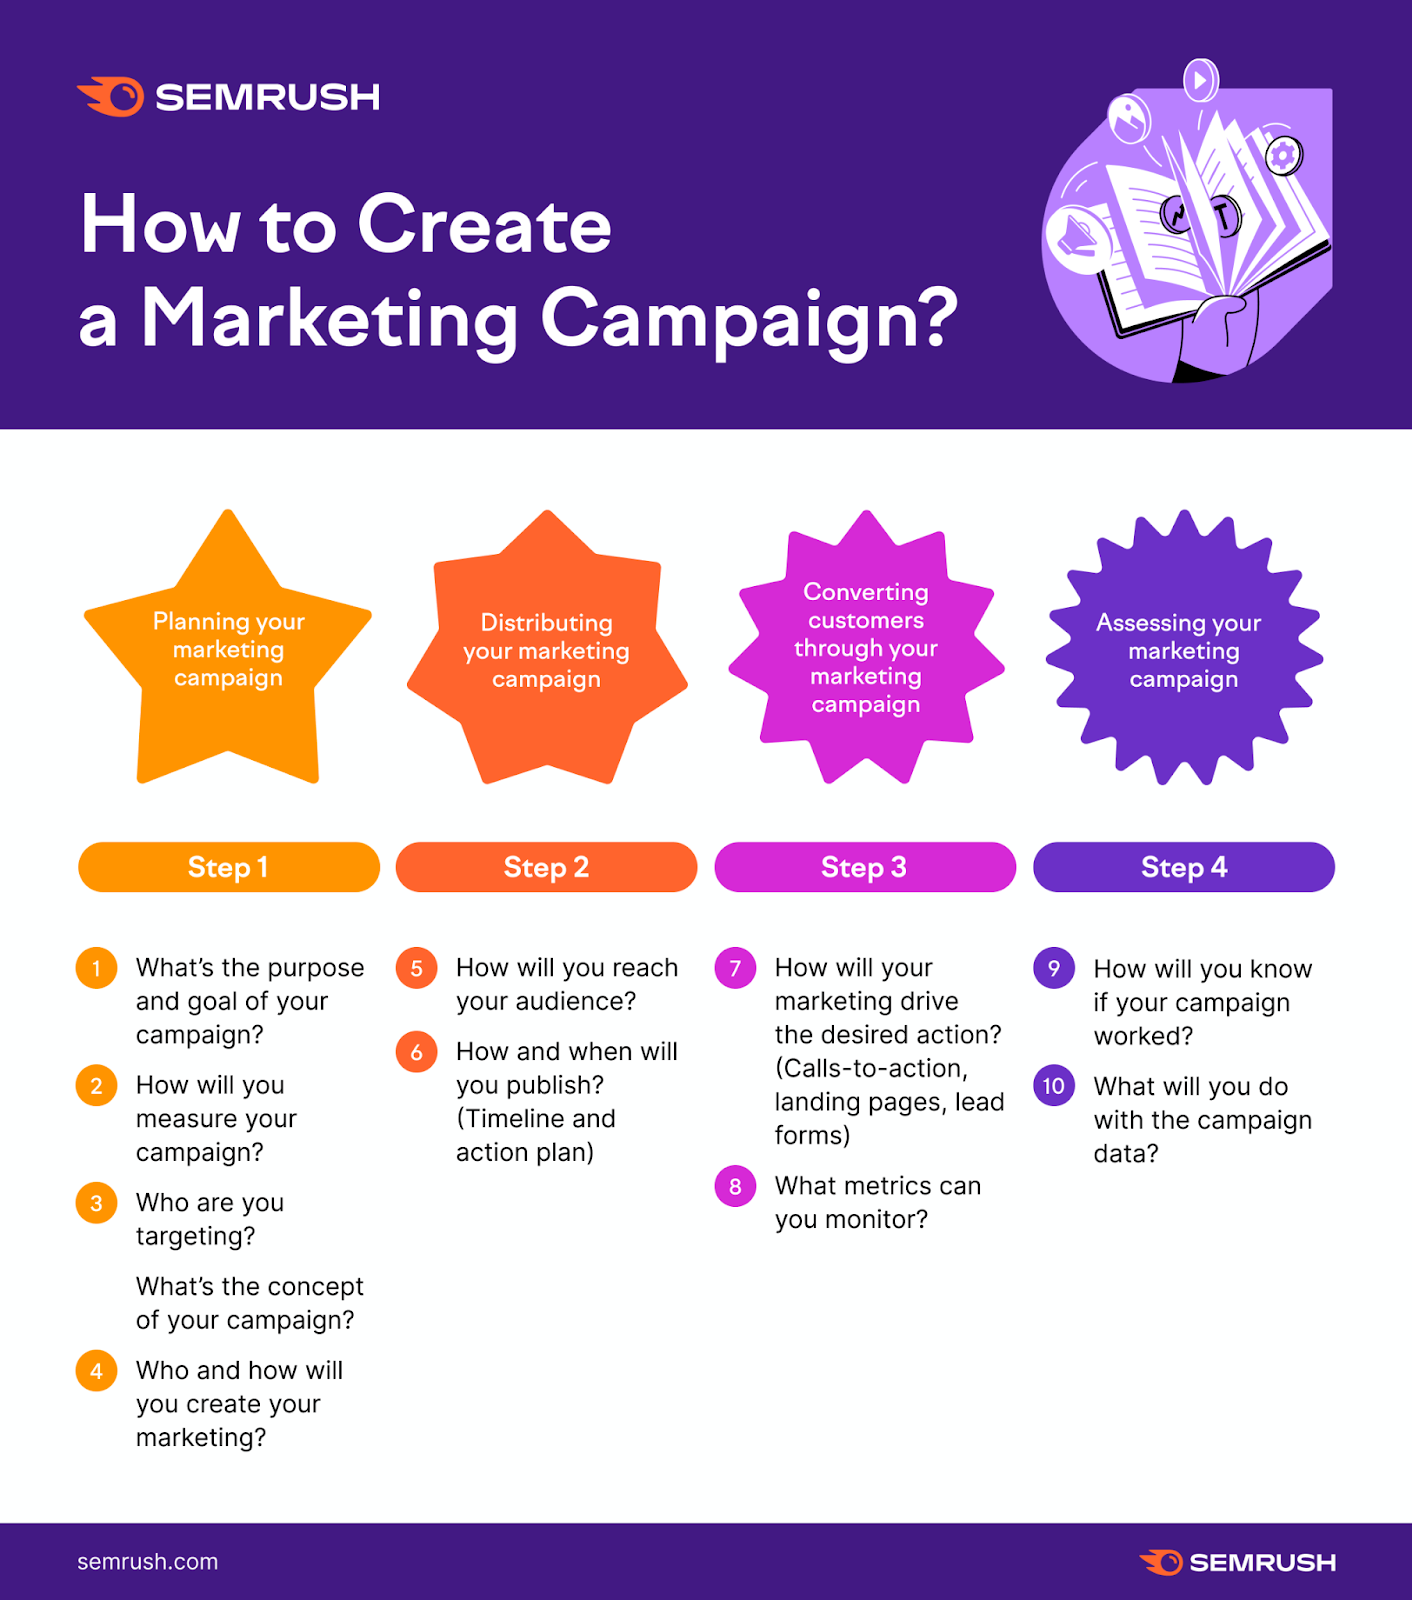 How to create a marketing campaign guide